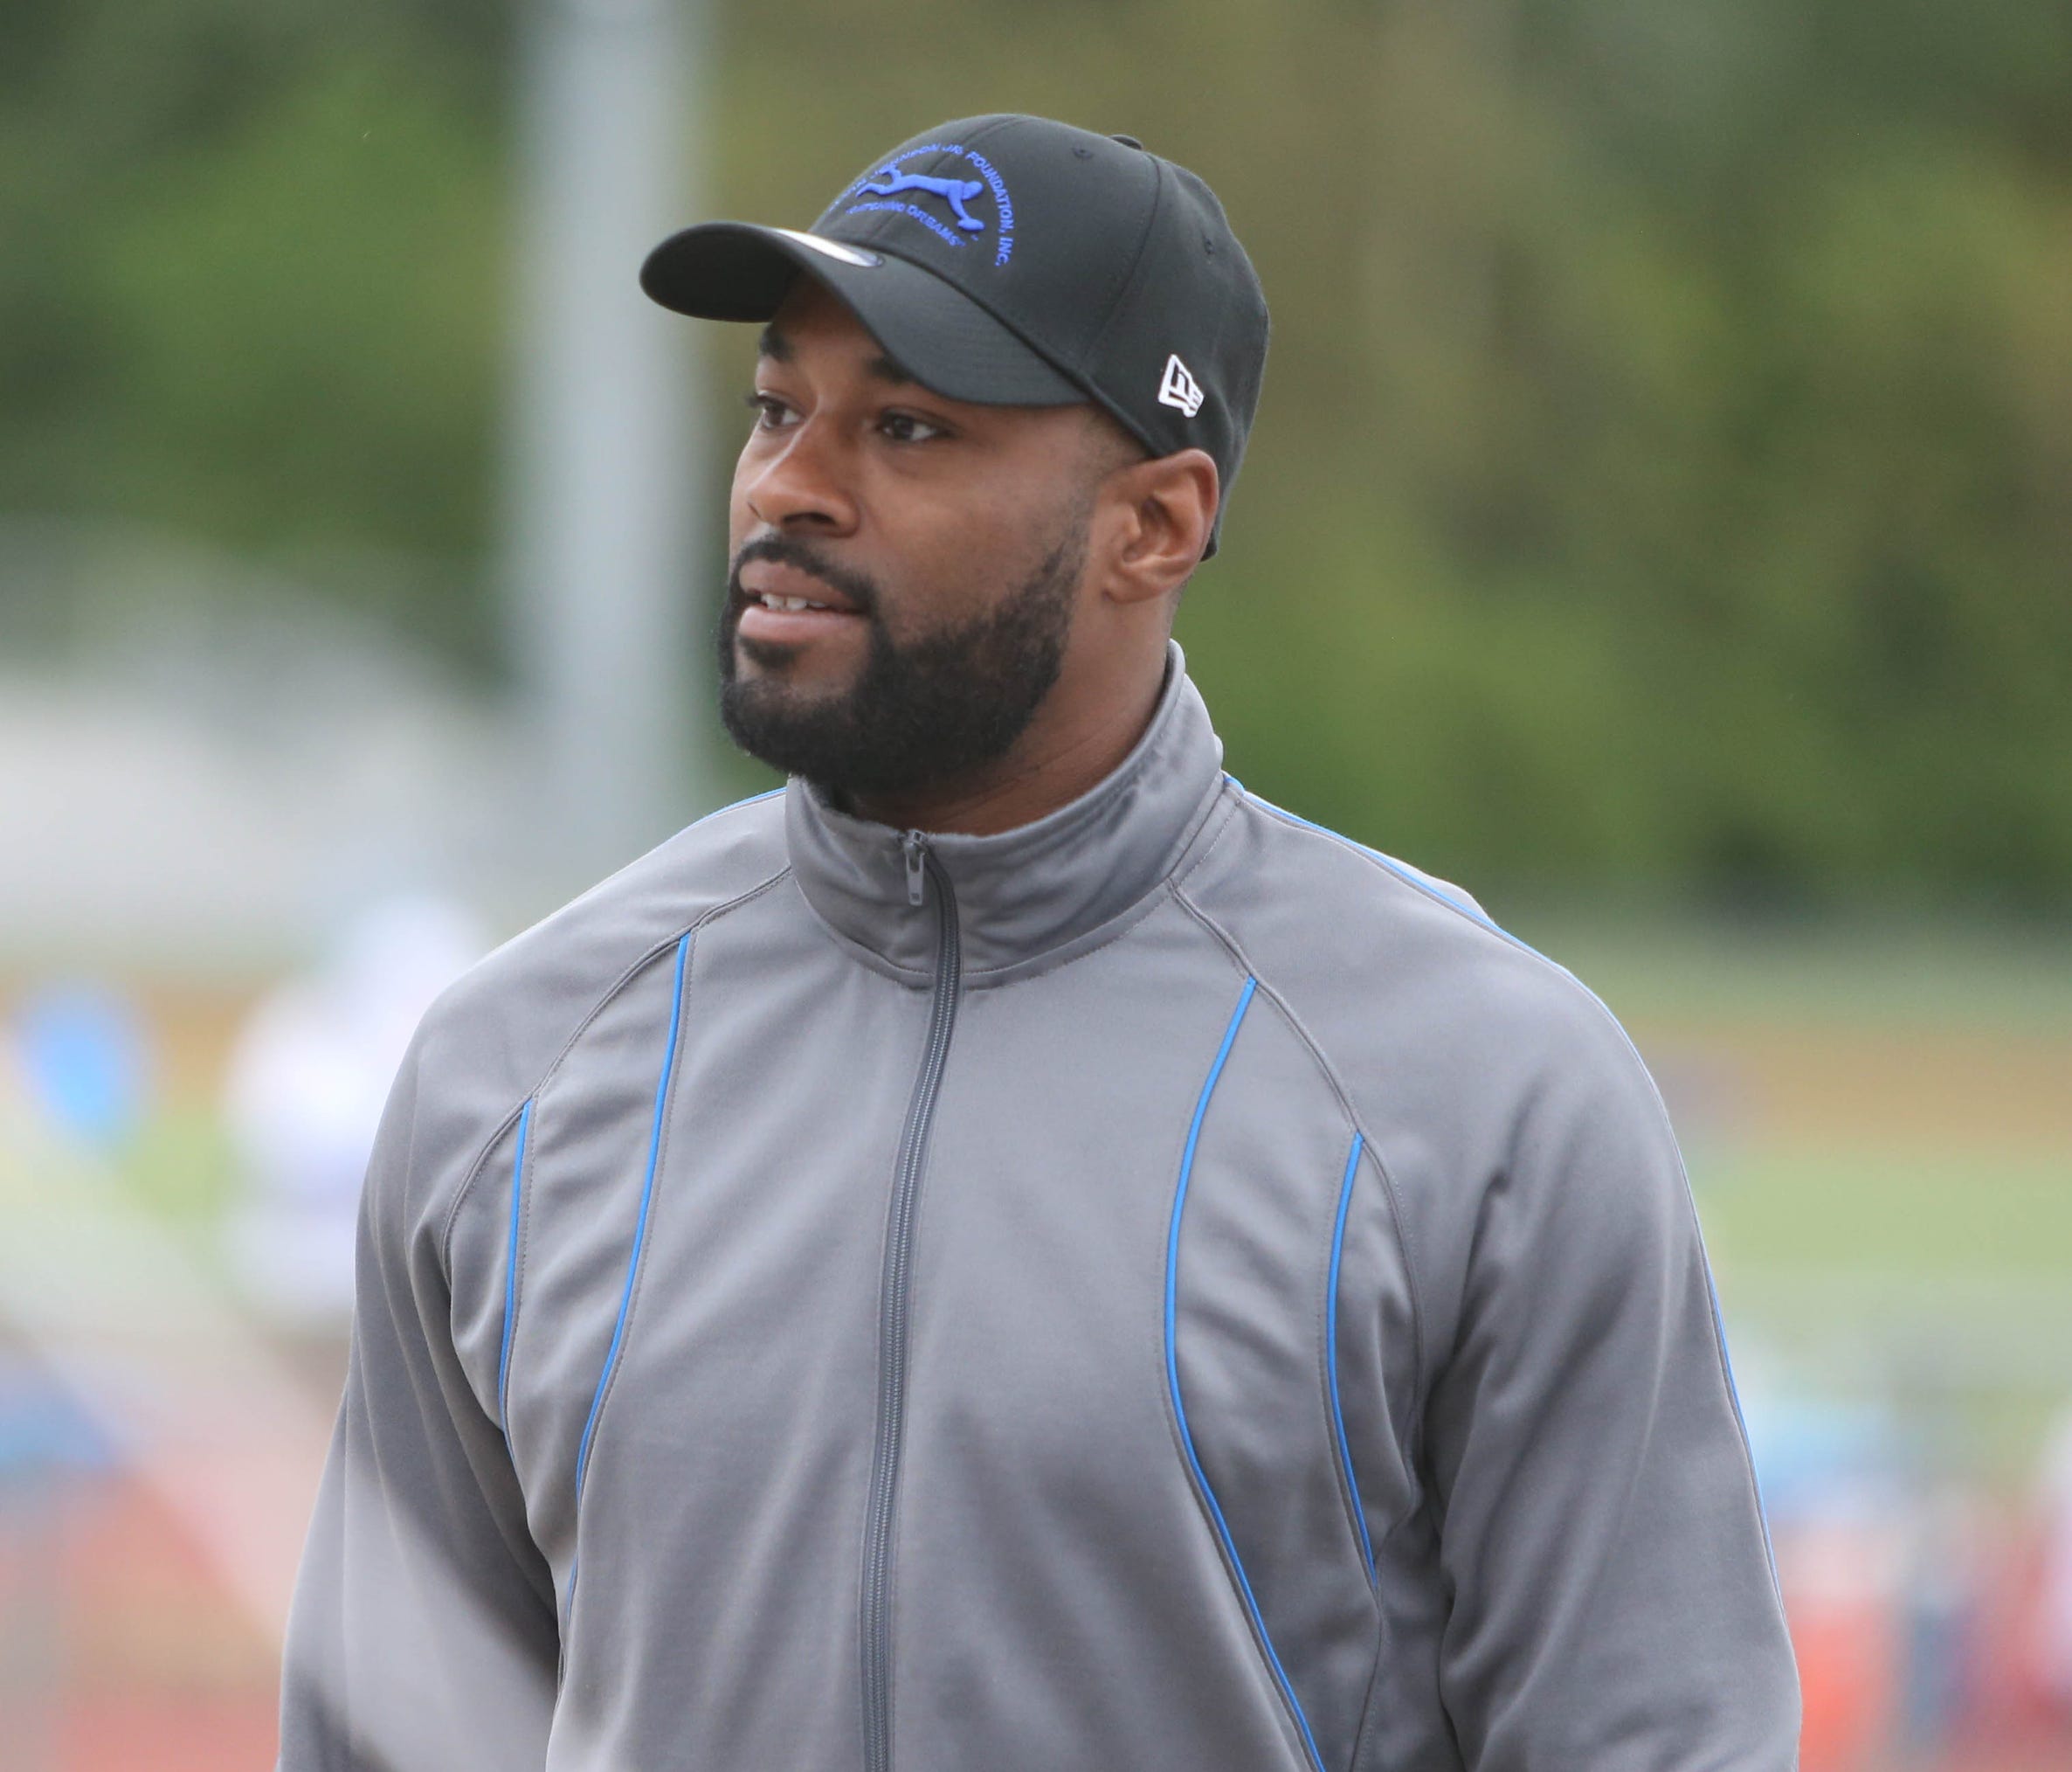 Former Detroit Lions receiver Calvin Johnson during the Calvin Johnson Jr. Foundation Catch a Dream football camp held at Southfield high school Saturday, May 20, 2017 in Southfield.